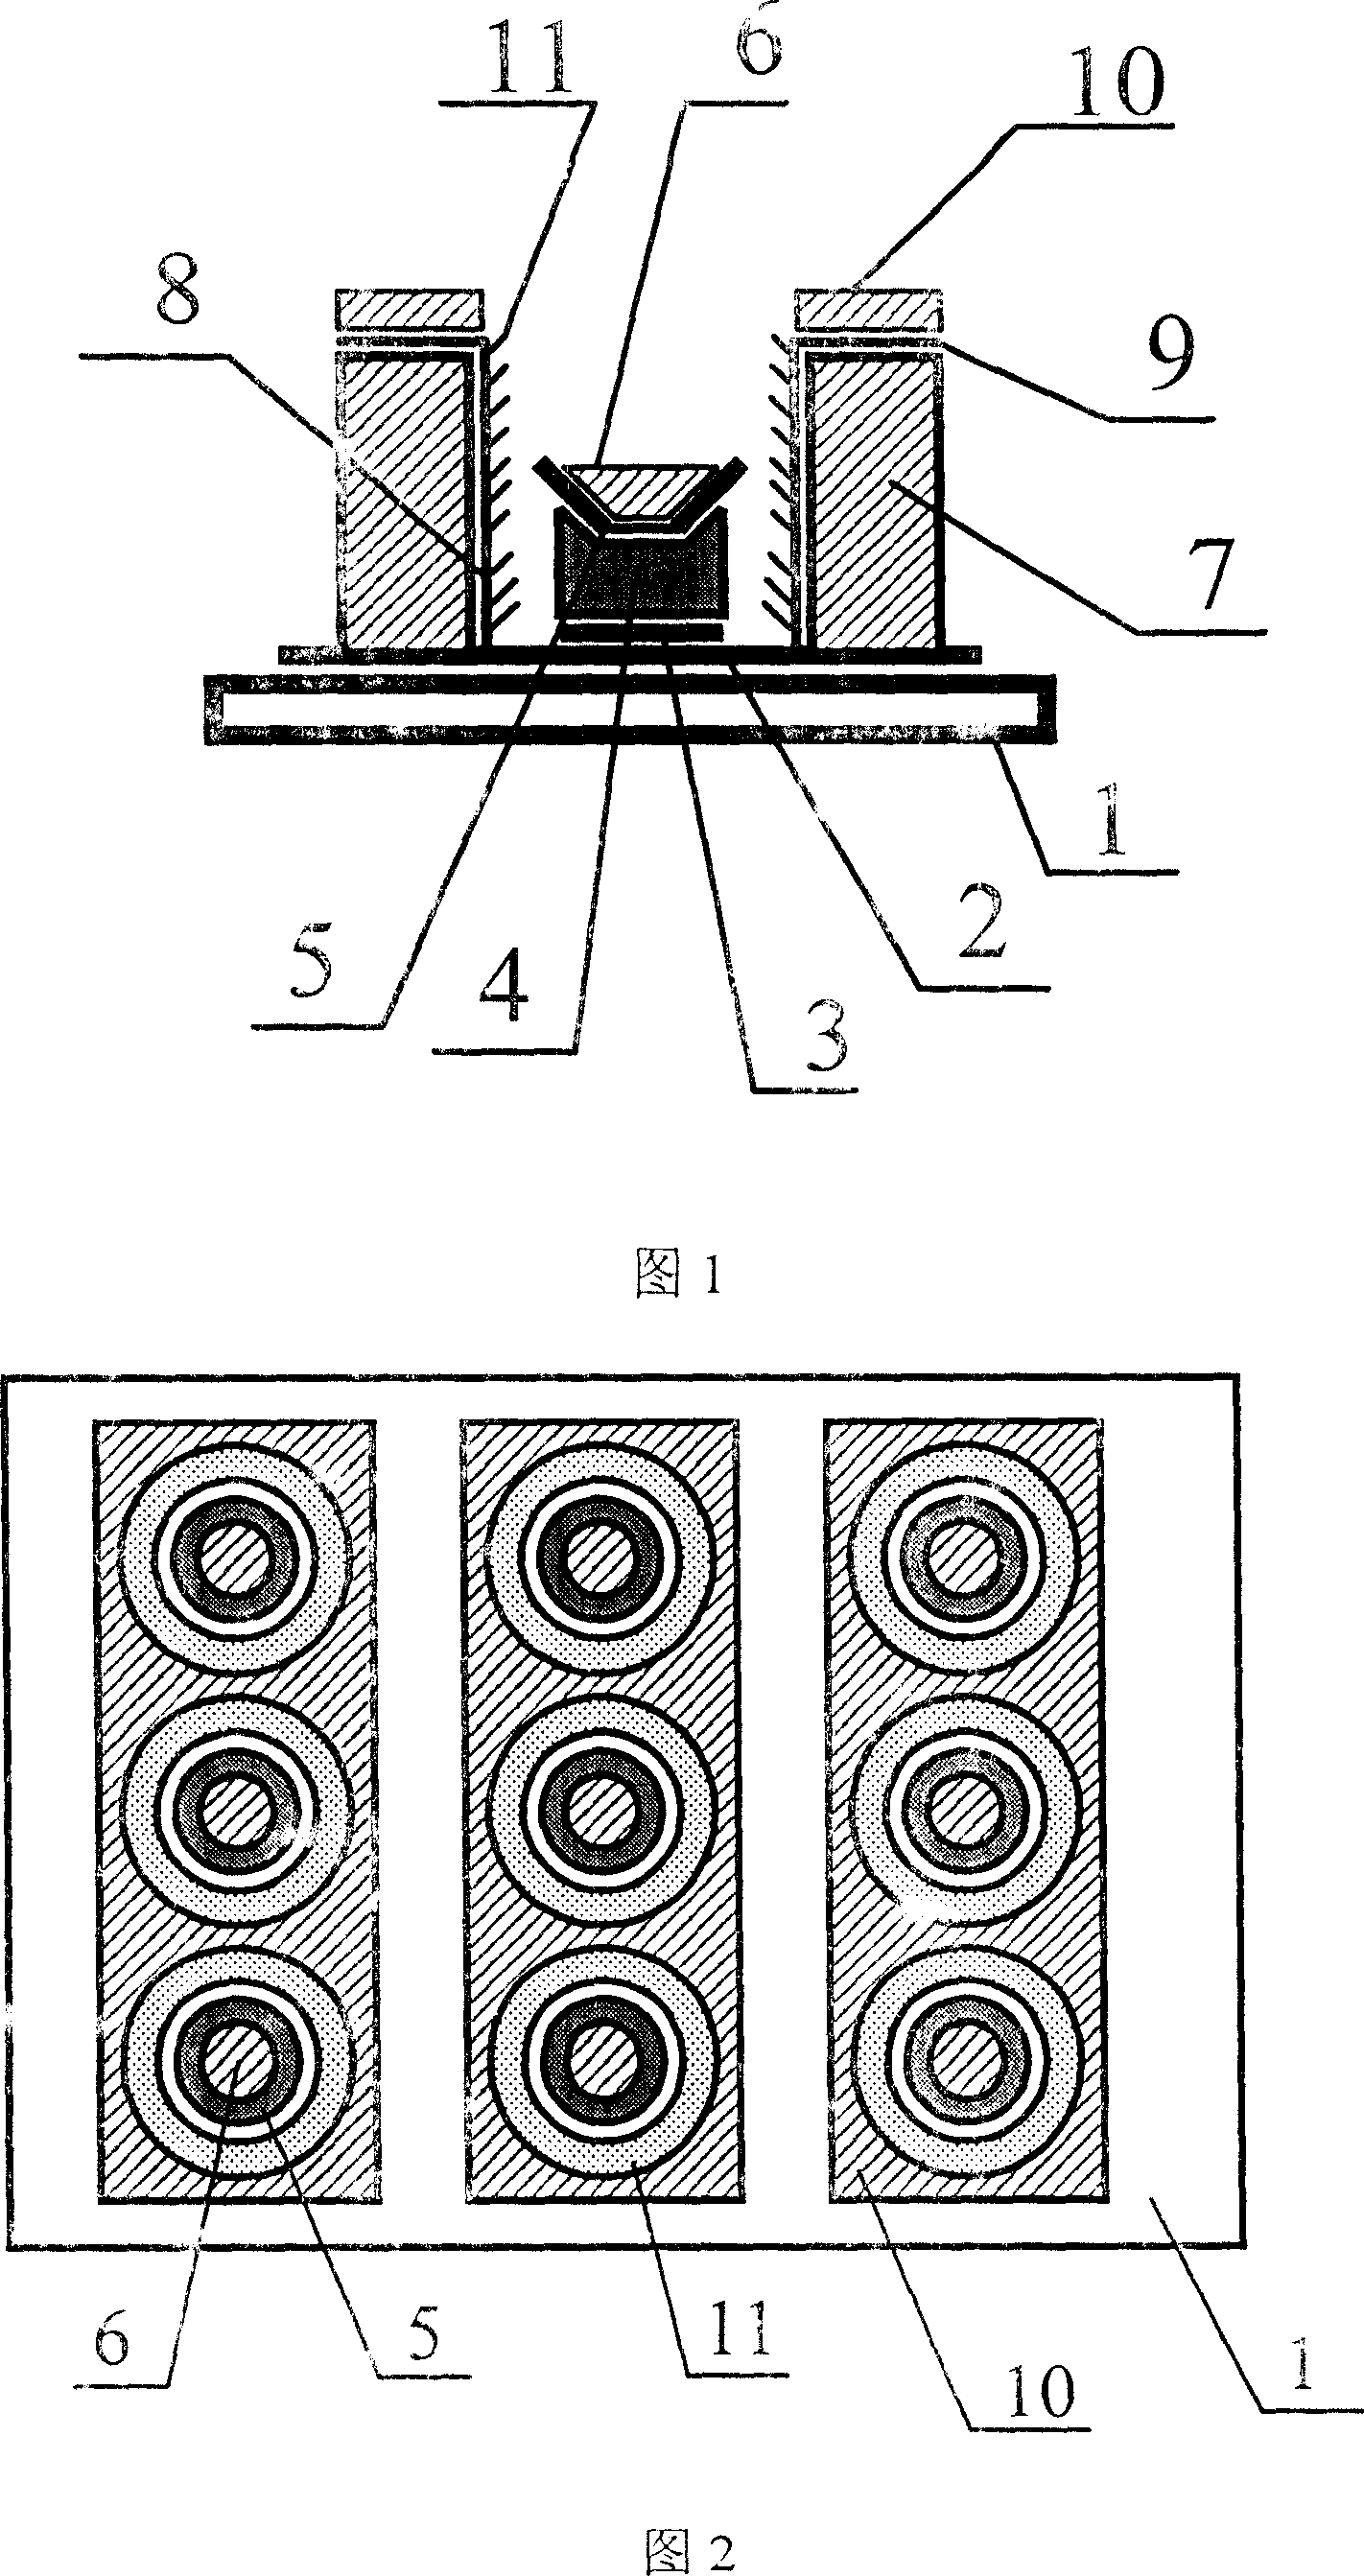 Flat-board display of round grid side-wall emitting structure and mfg. process